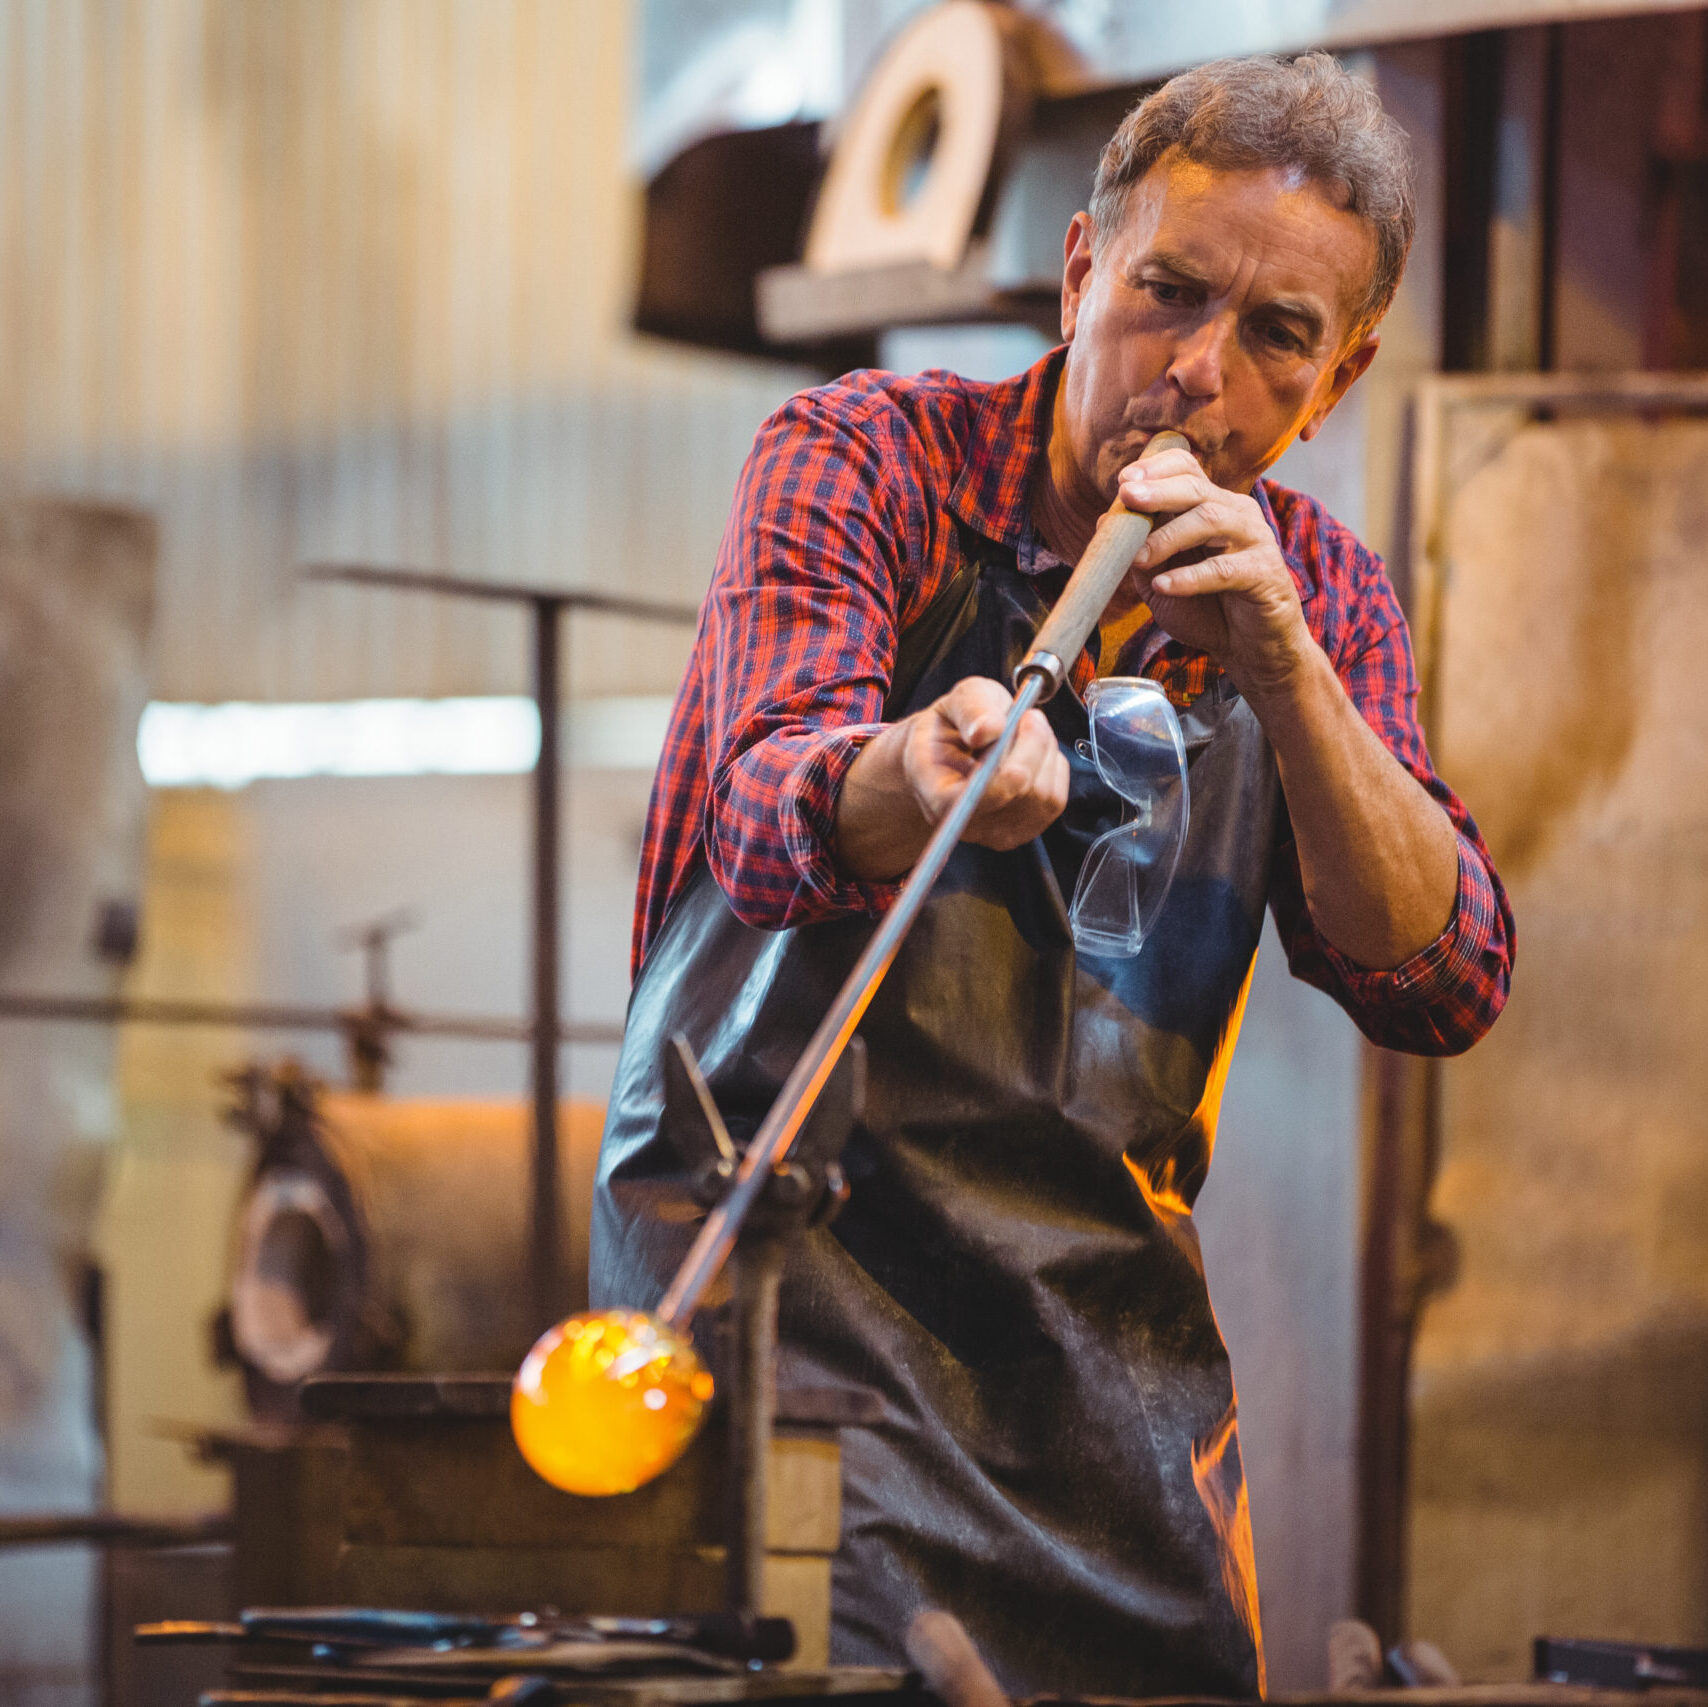 A glassblower shaping molten glass using a blowpipe in a workshop.